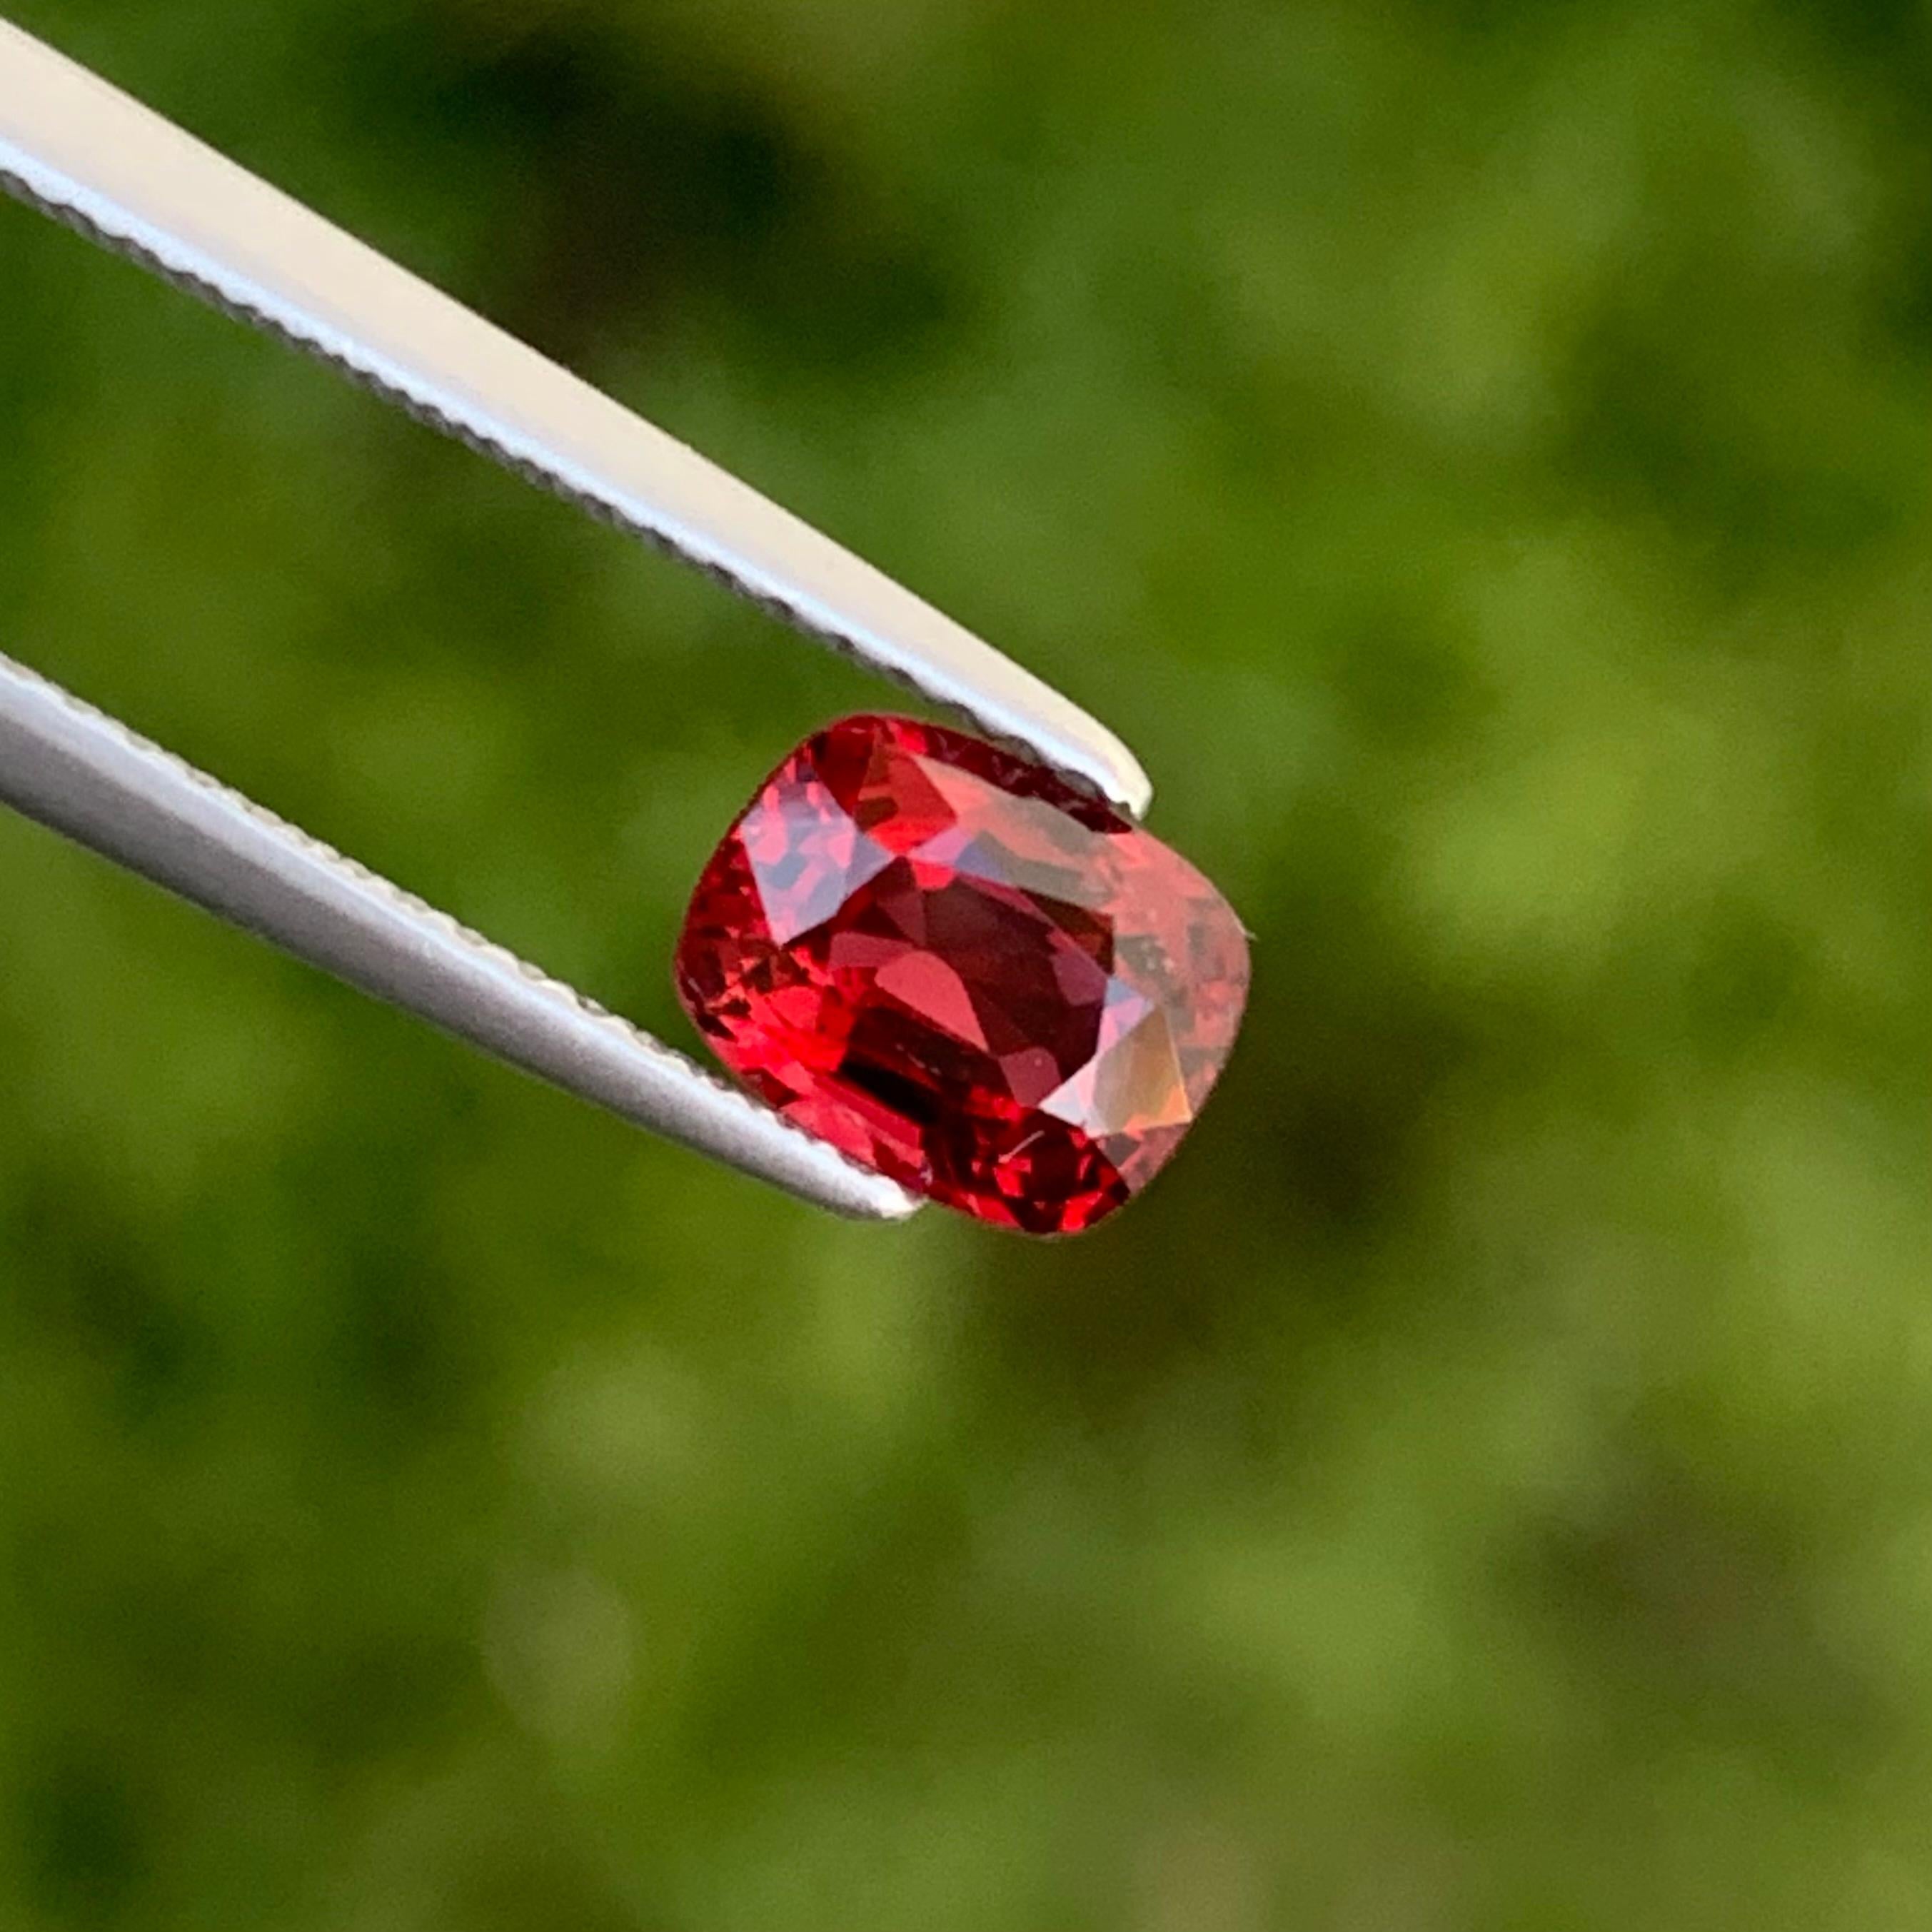 Women's or Men's 1.05 Carat Loose Red Spinel from Myanmar Burma Available for Jewelry Making